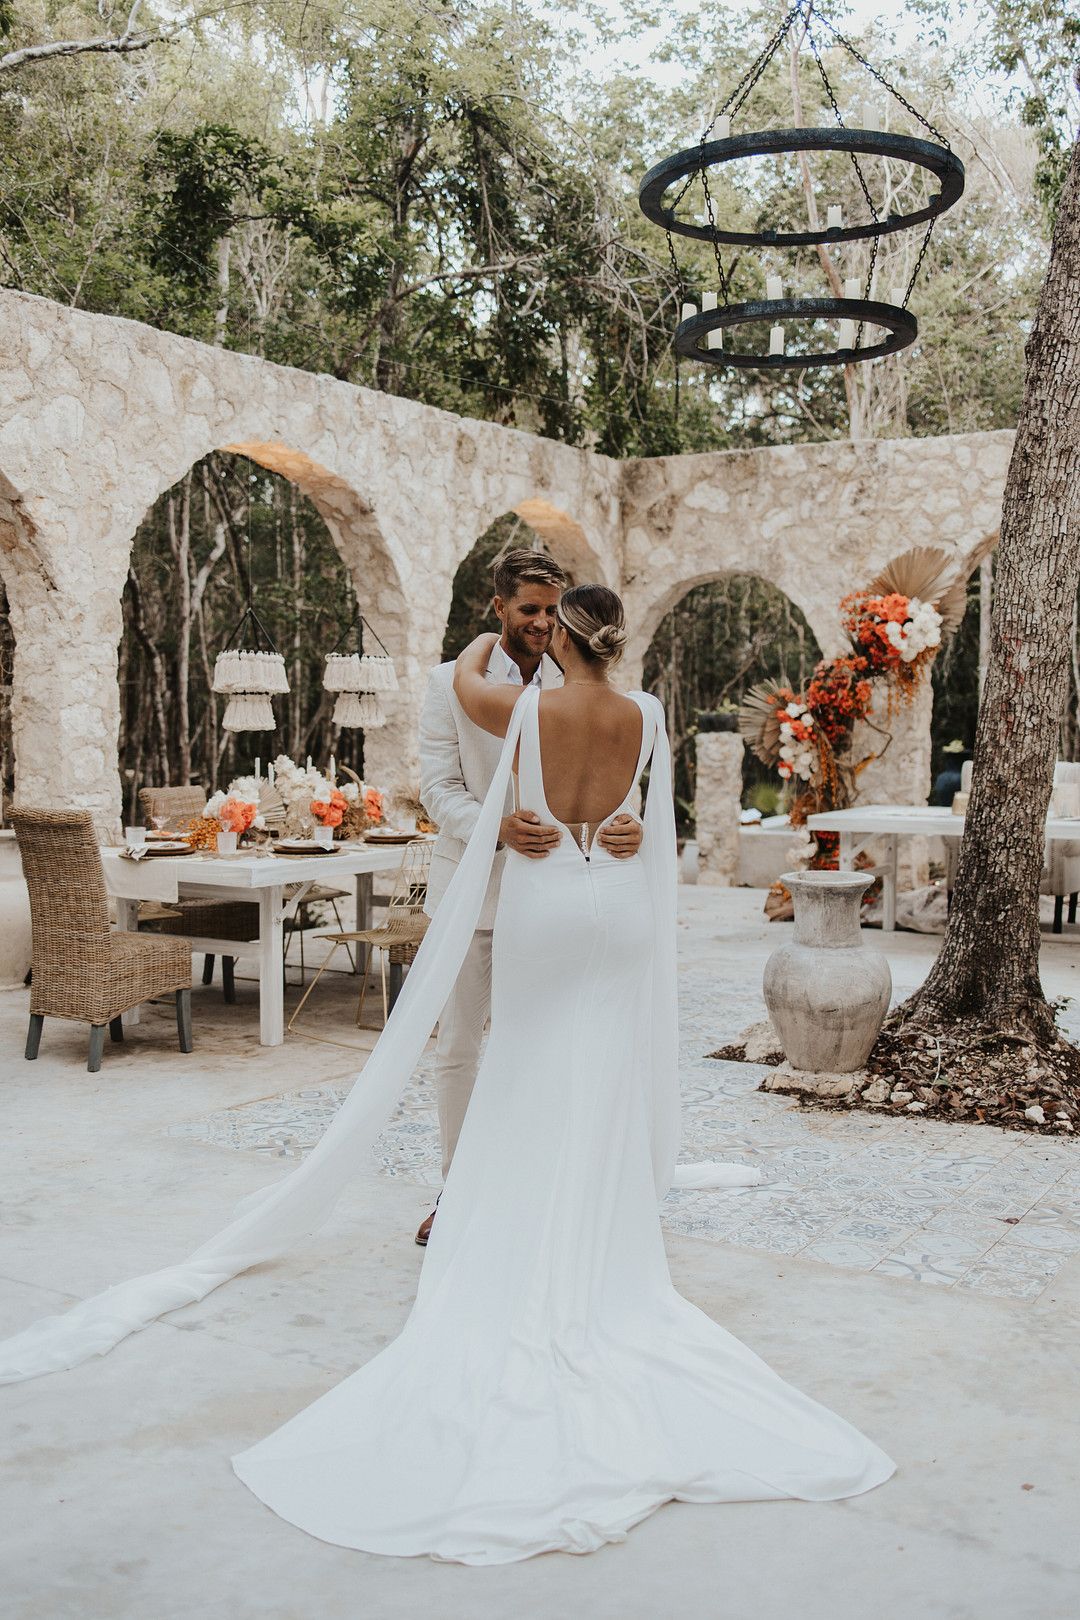 bride and groom dancing at micro wedding inspiration shoot in Tulum